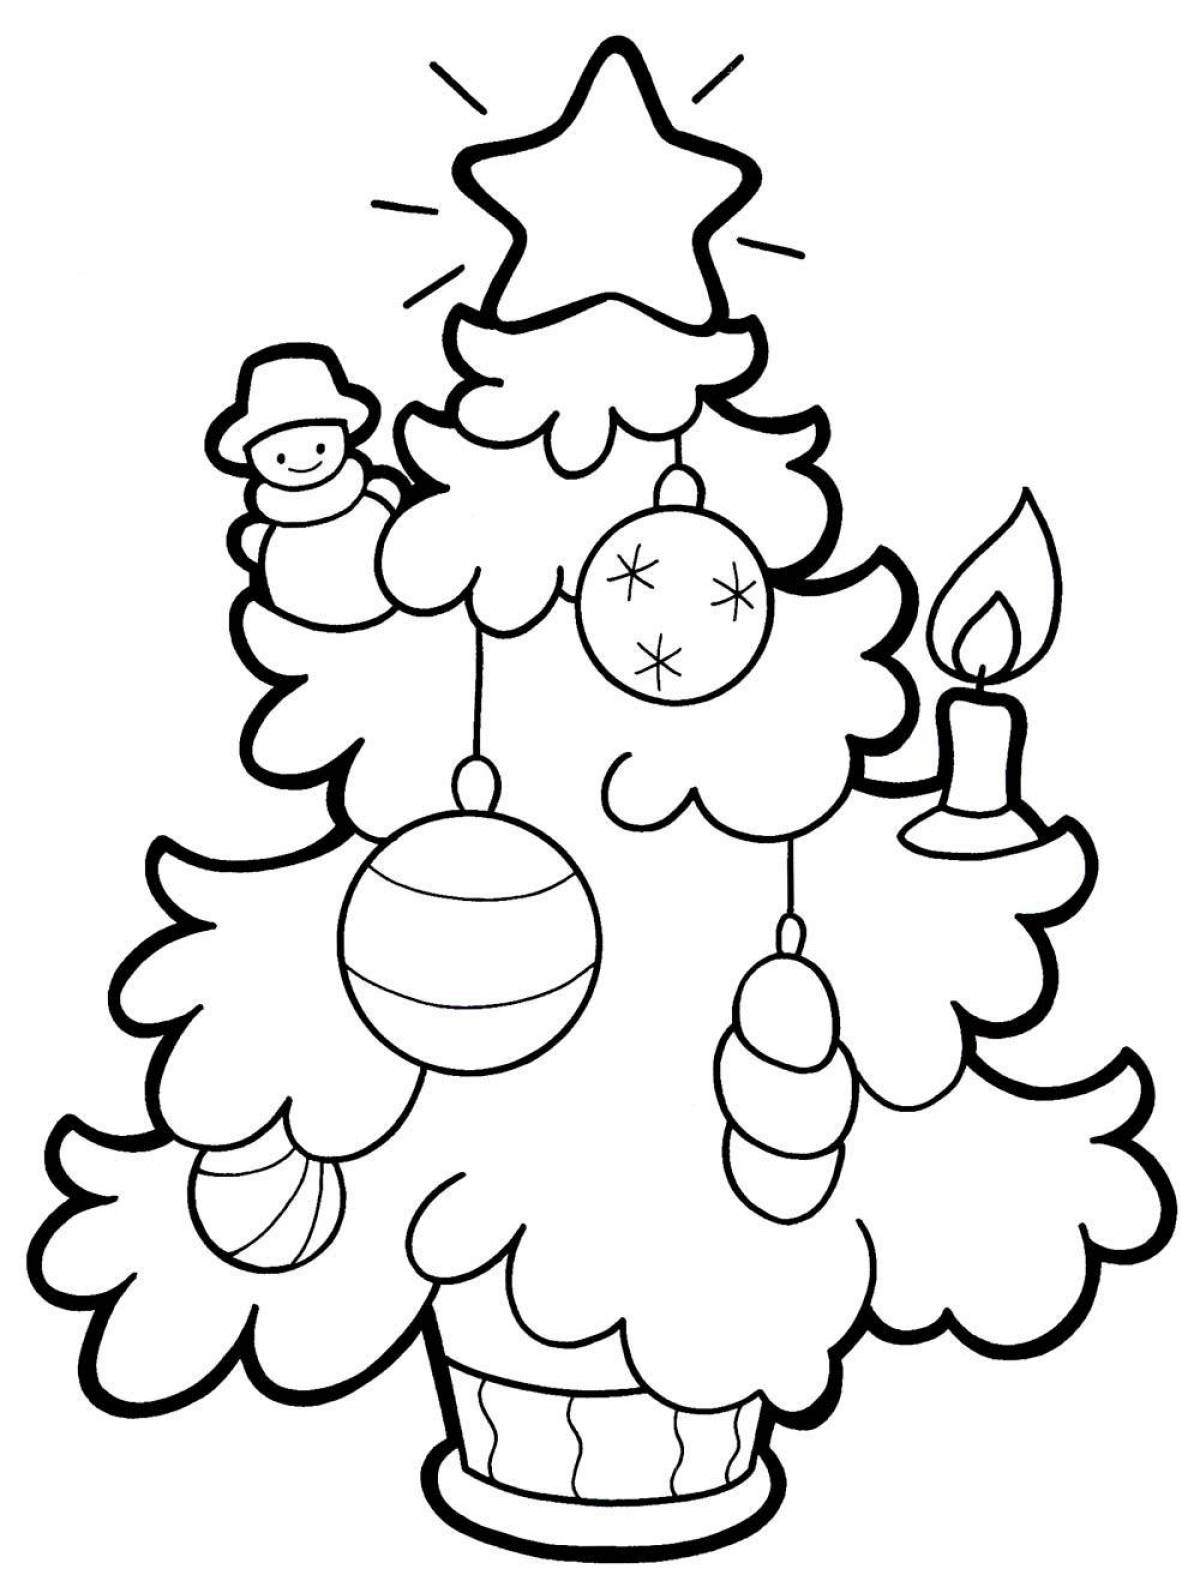 Great Christmas tree coloring book for 2-3 year olds